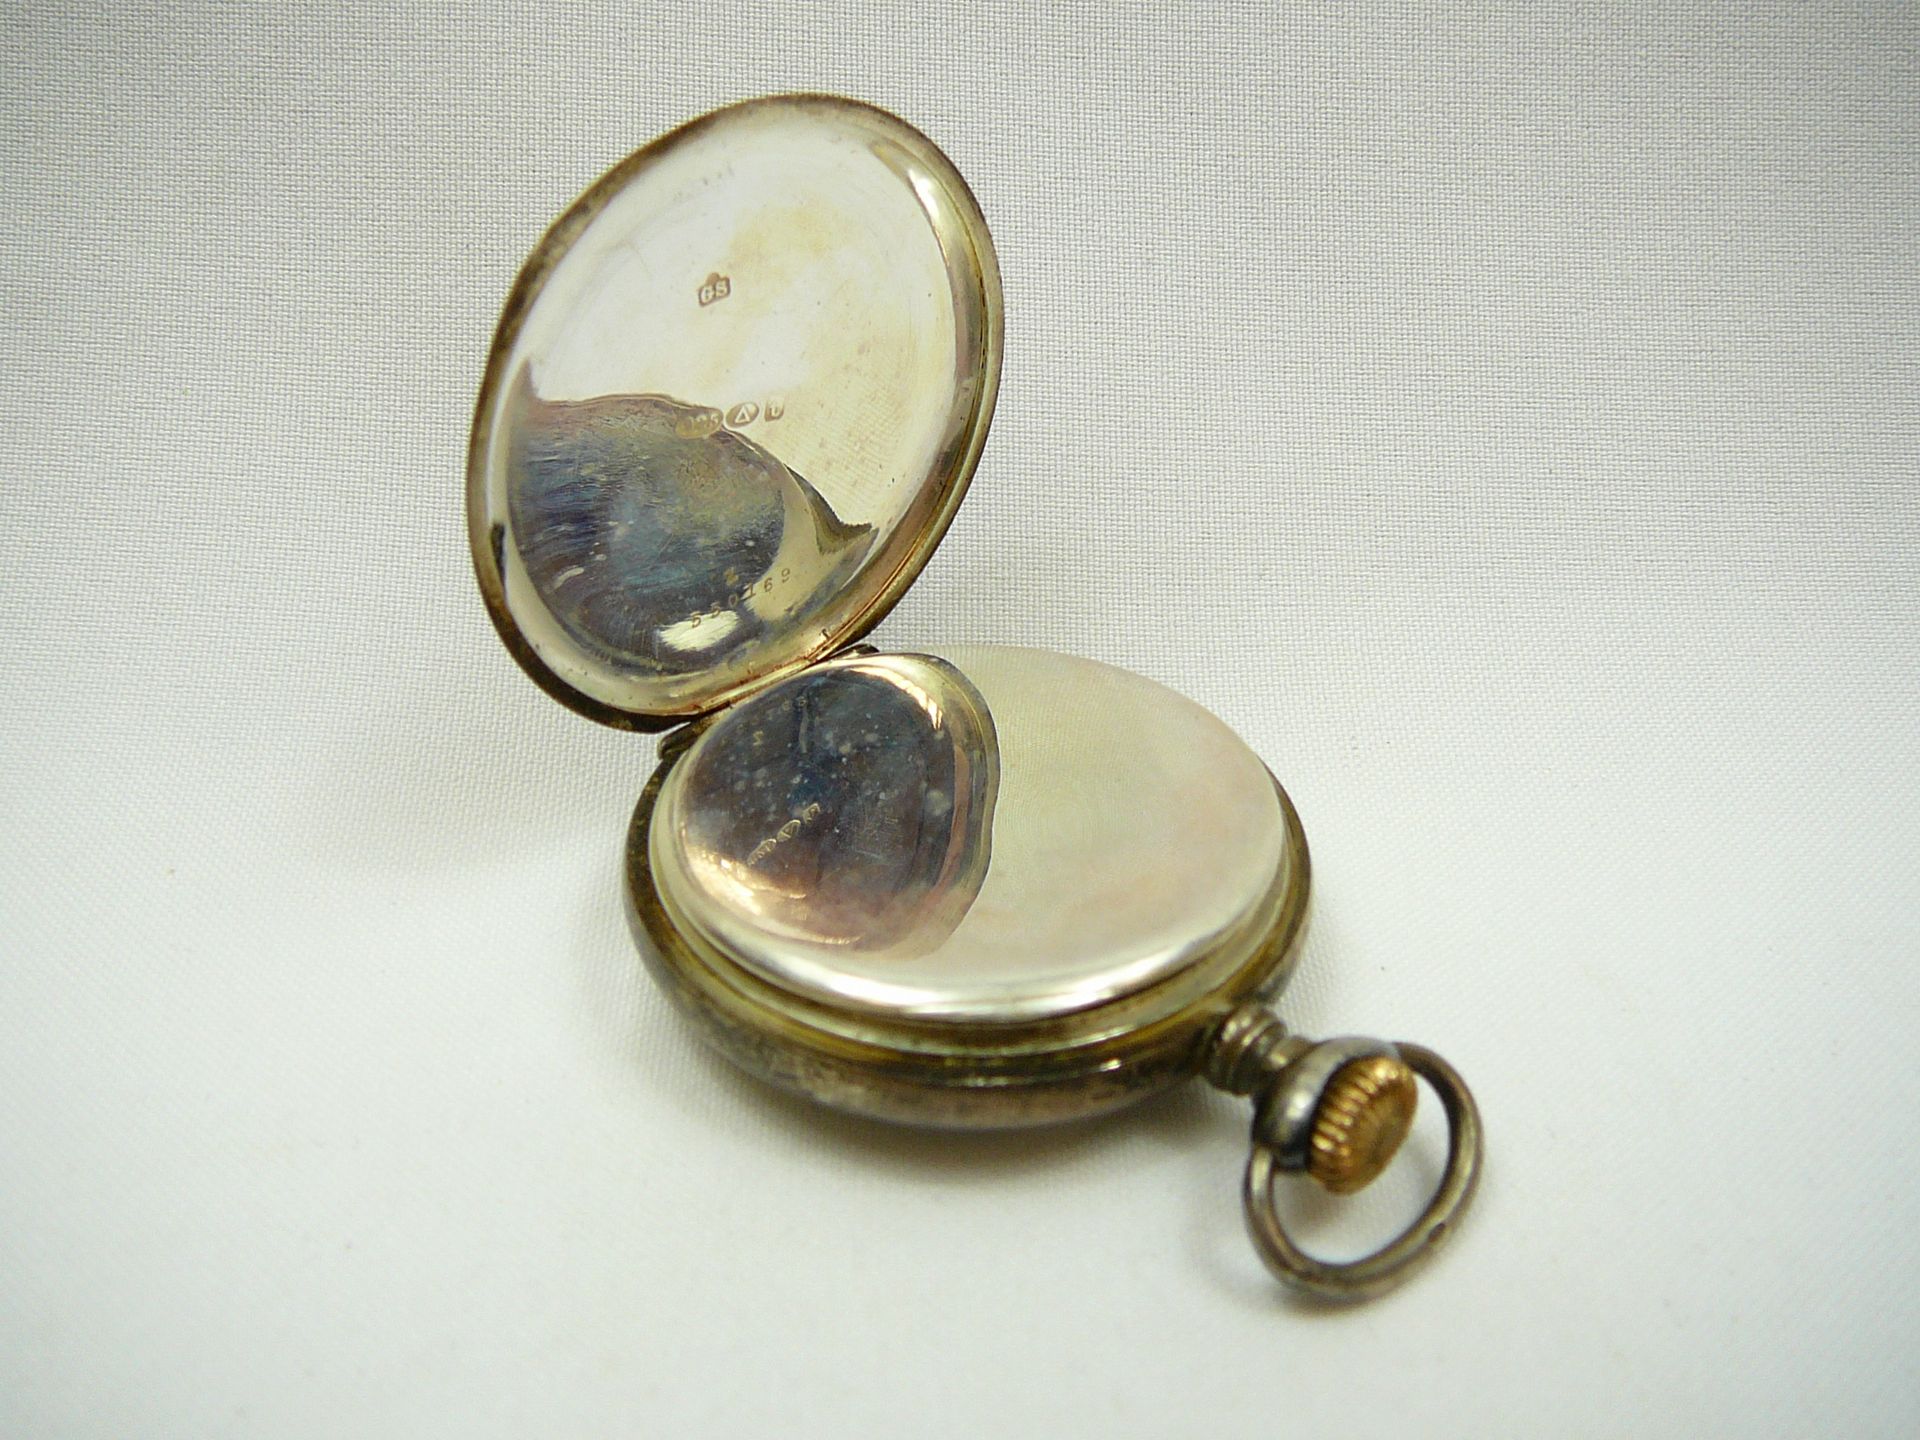 Gents Antique Silver Pocket Watch by Trenton - Image 3 of 5